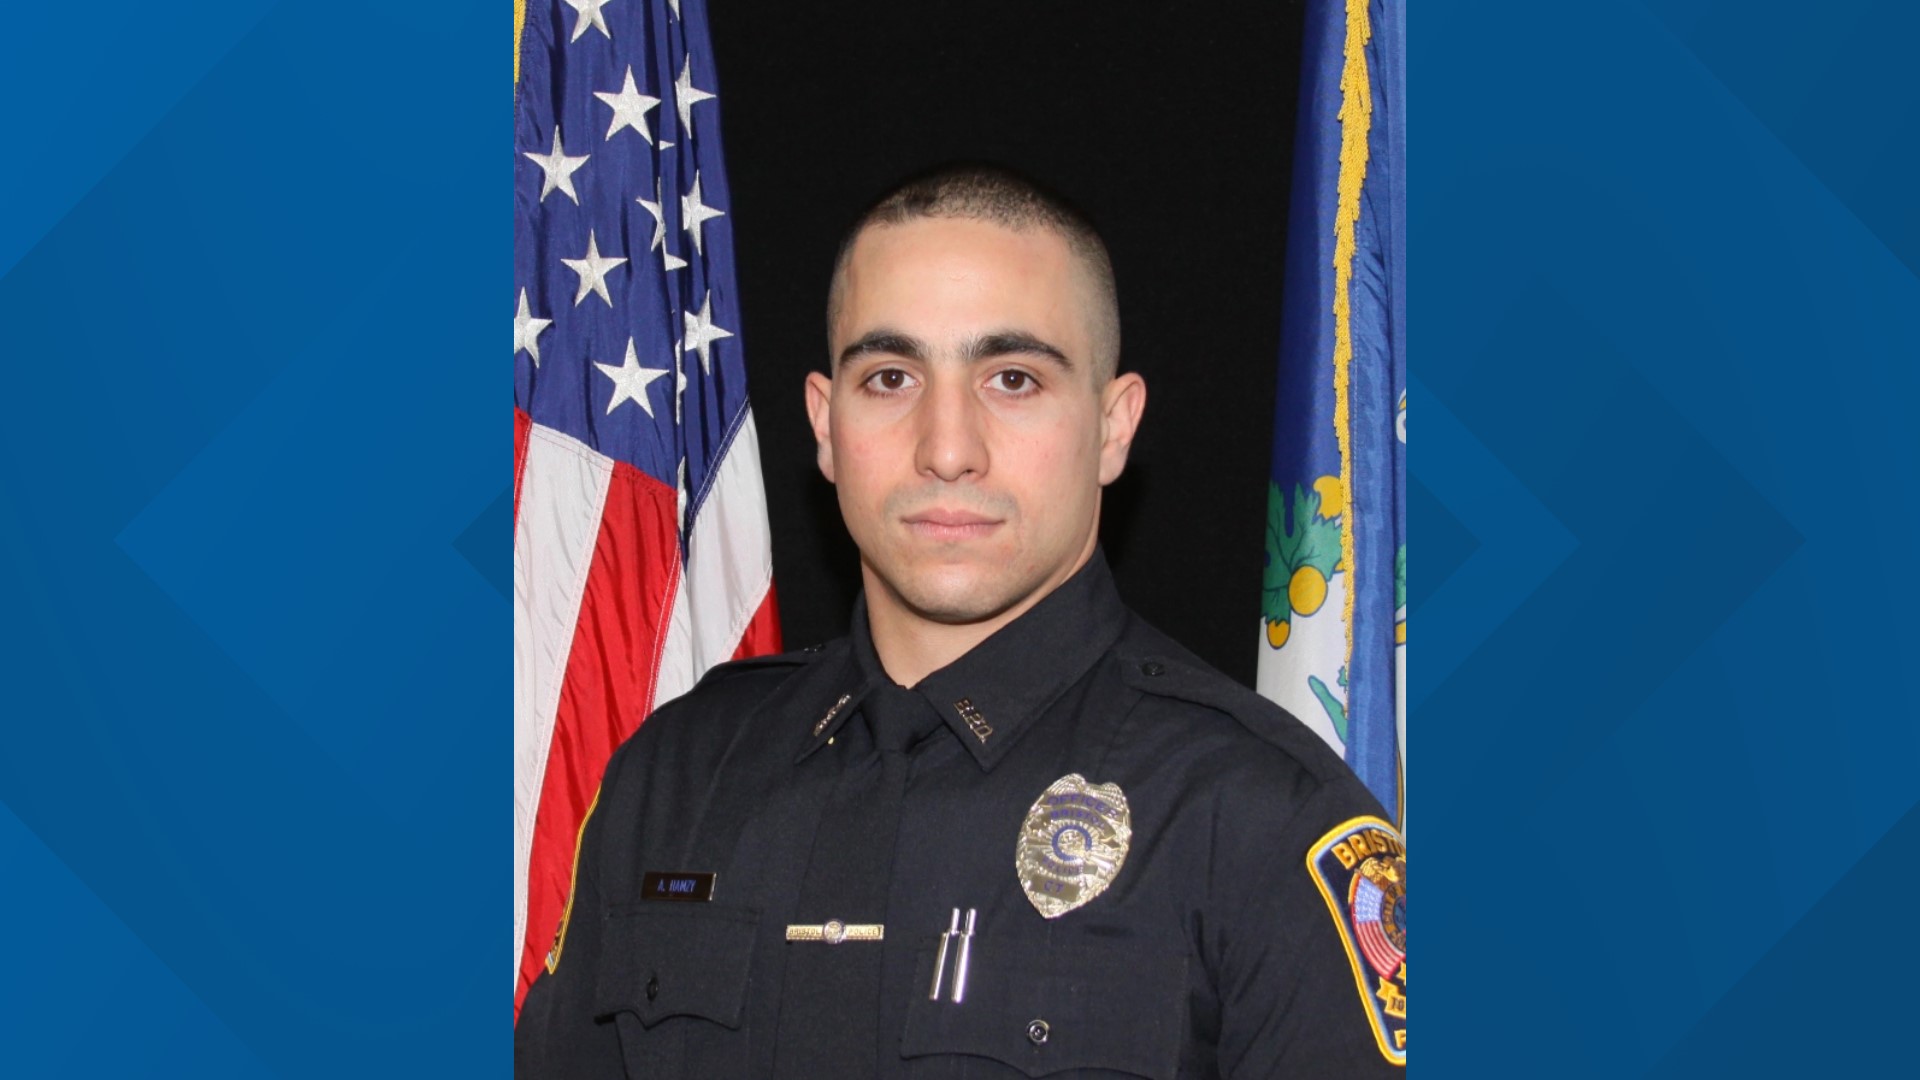 Calling hours for Sgt. Alex Hamzy were held in Terryville.